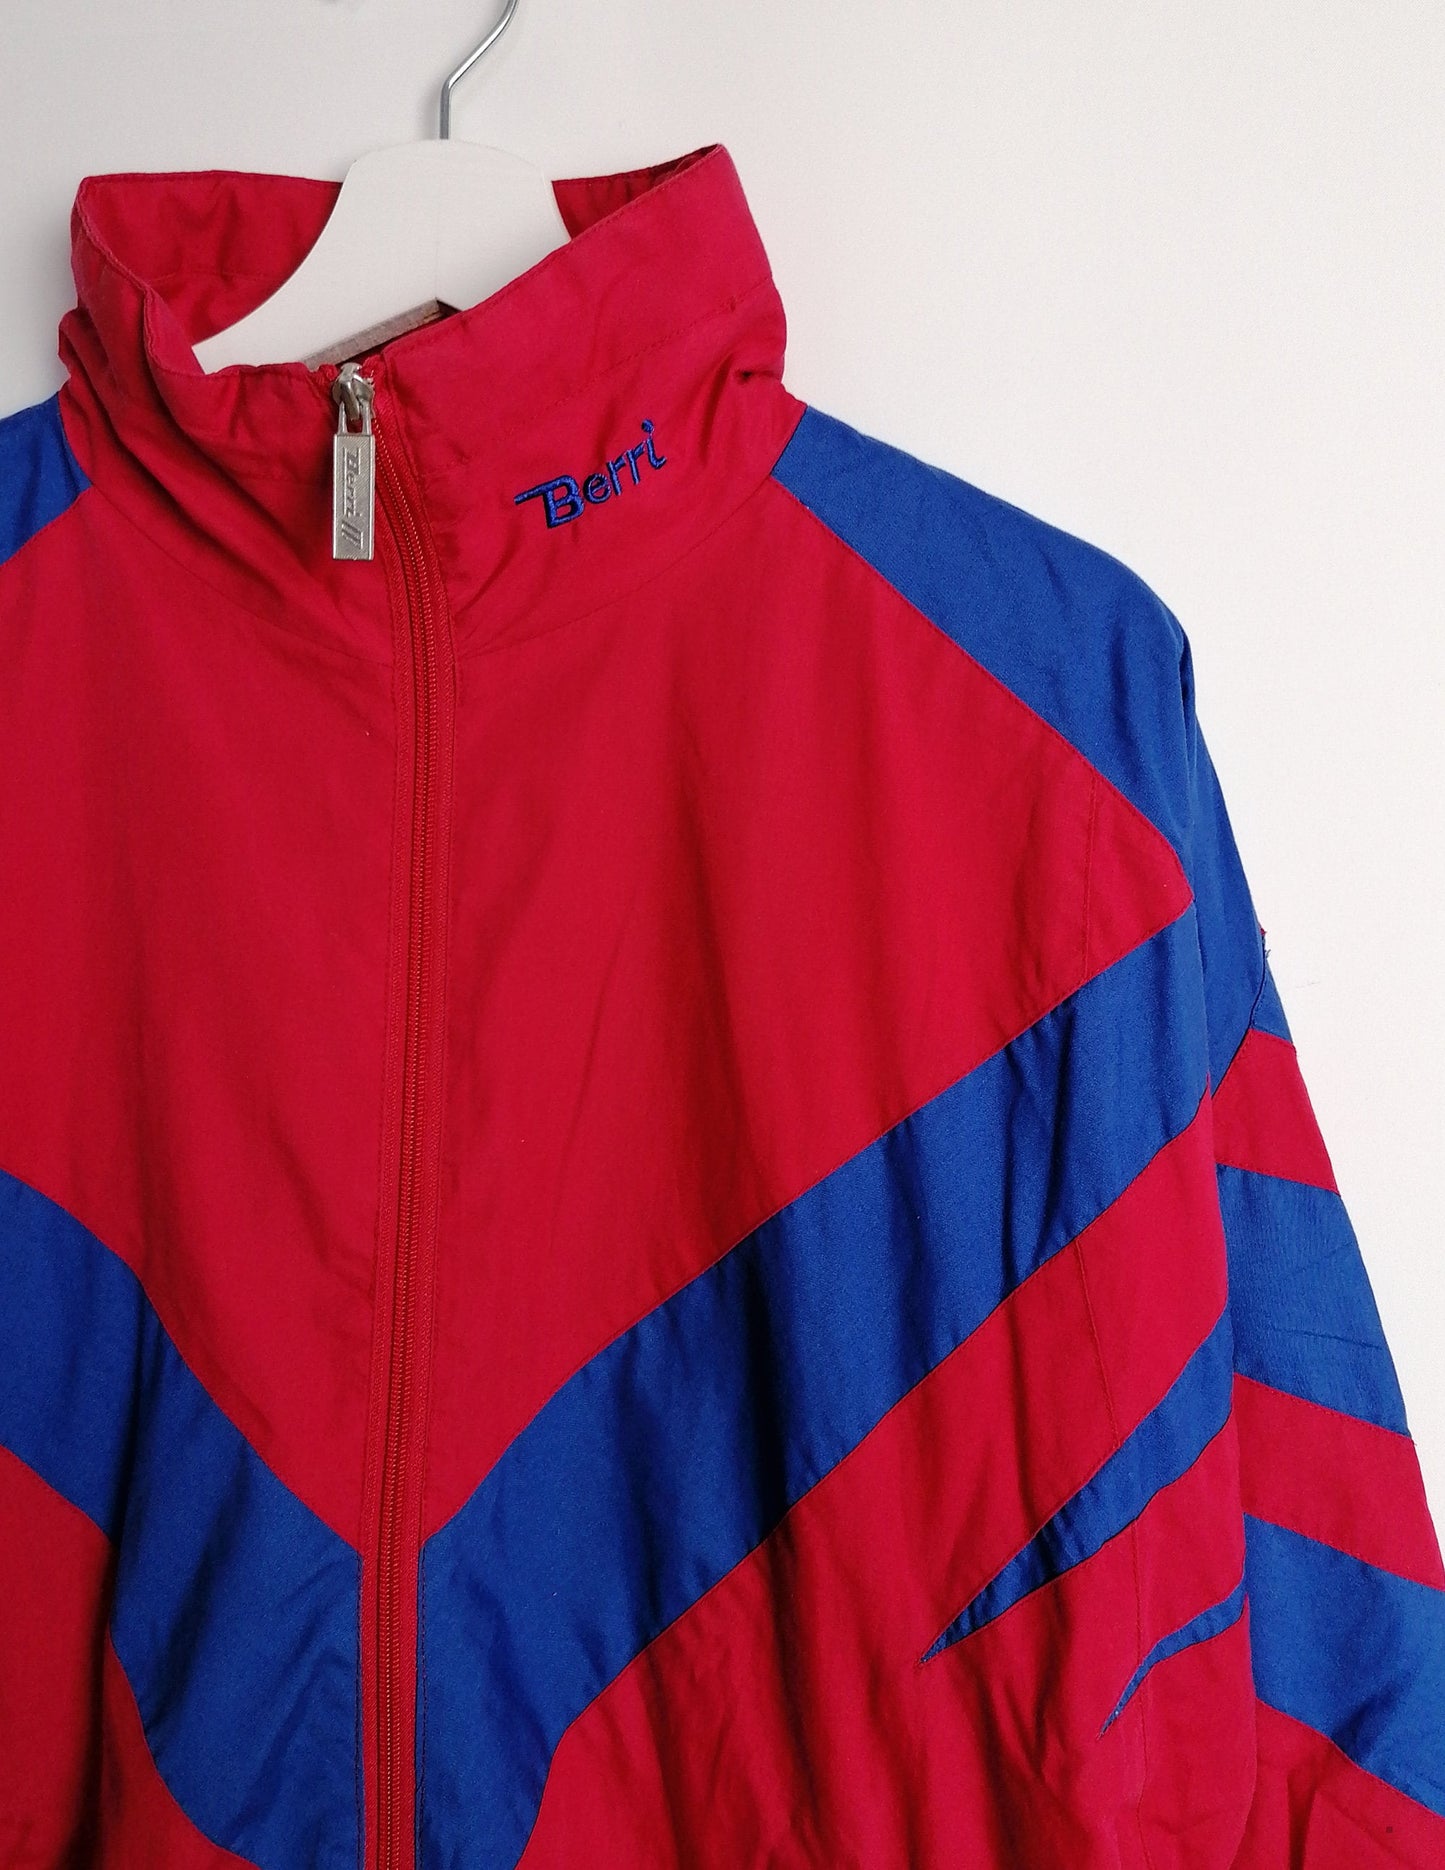 BERRI 90's Unisex Track Jacket Red and Blue - size S